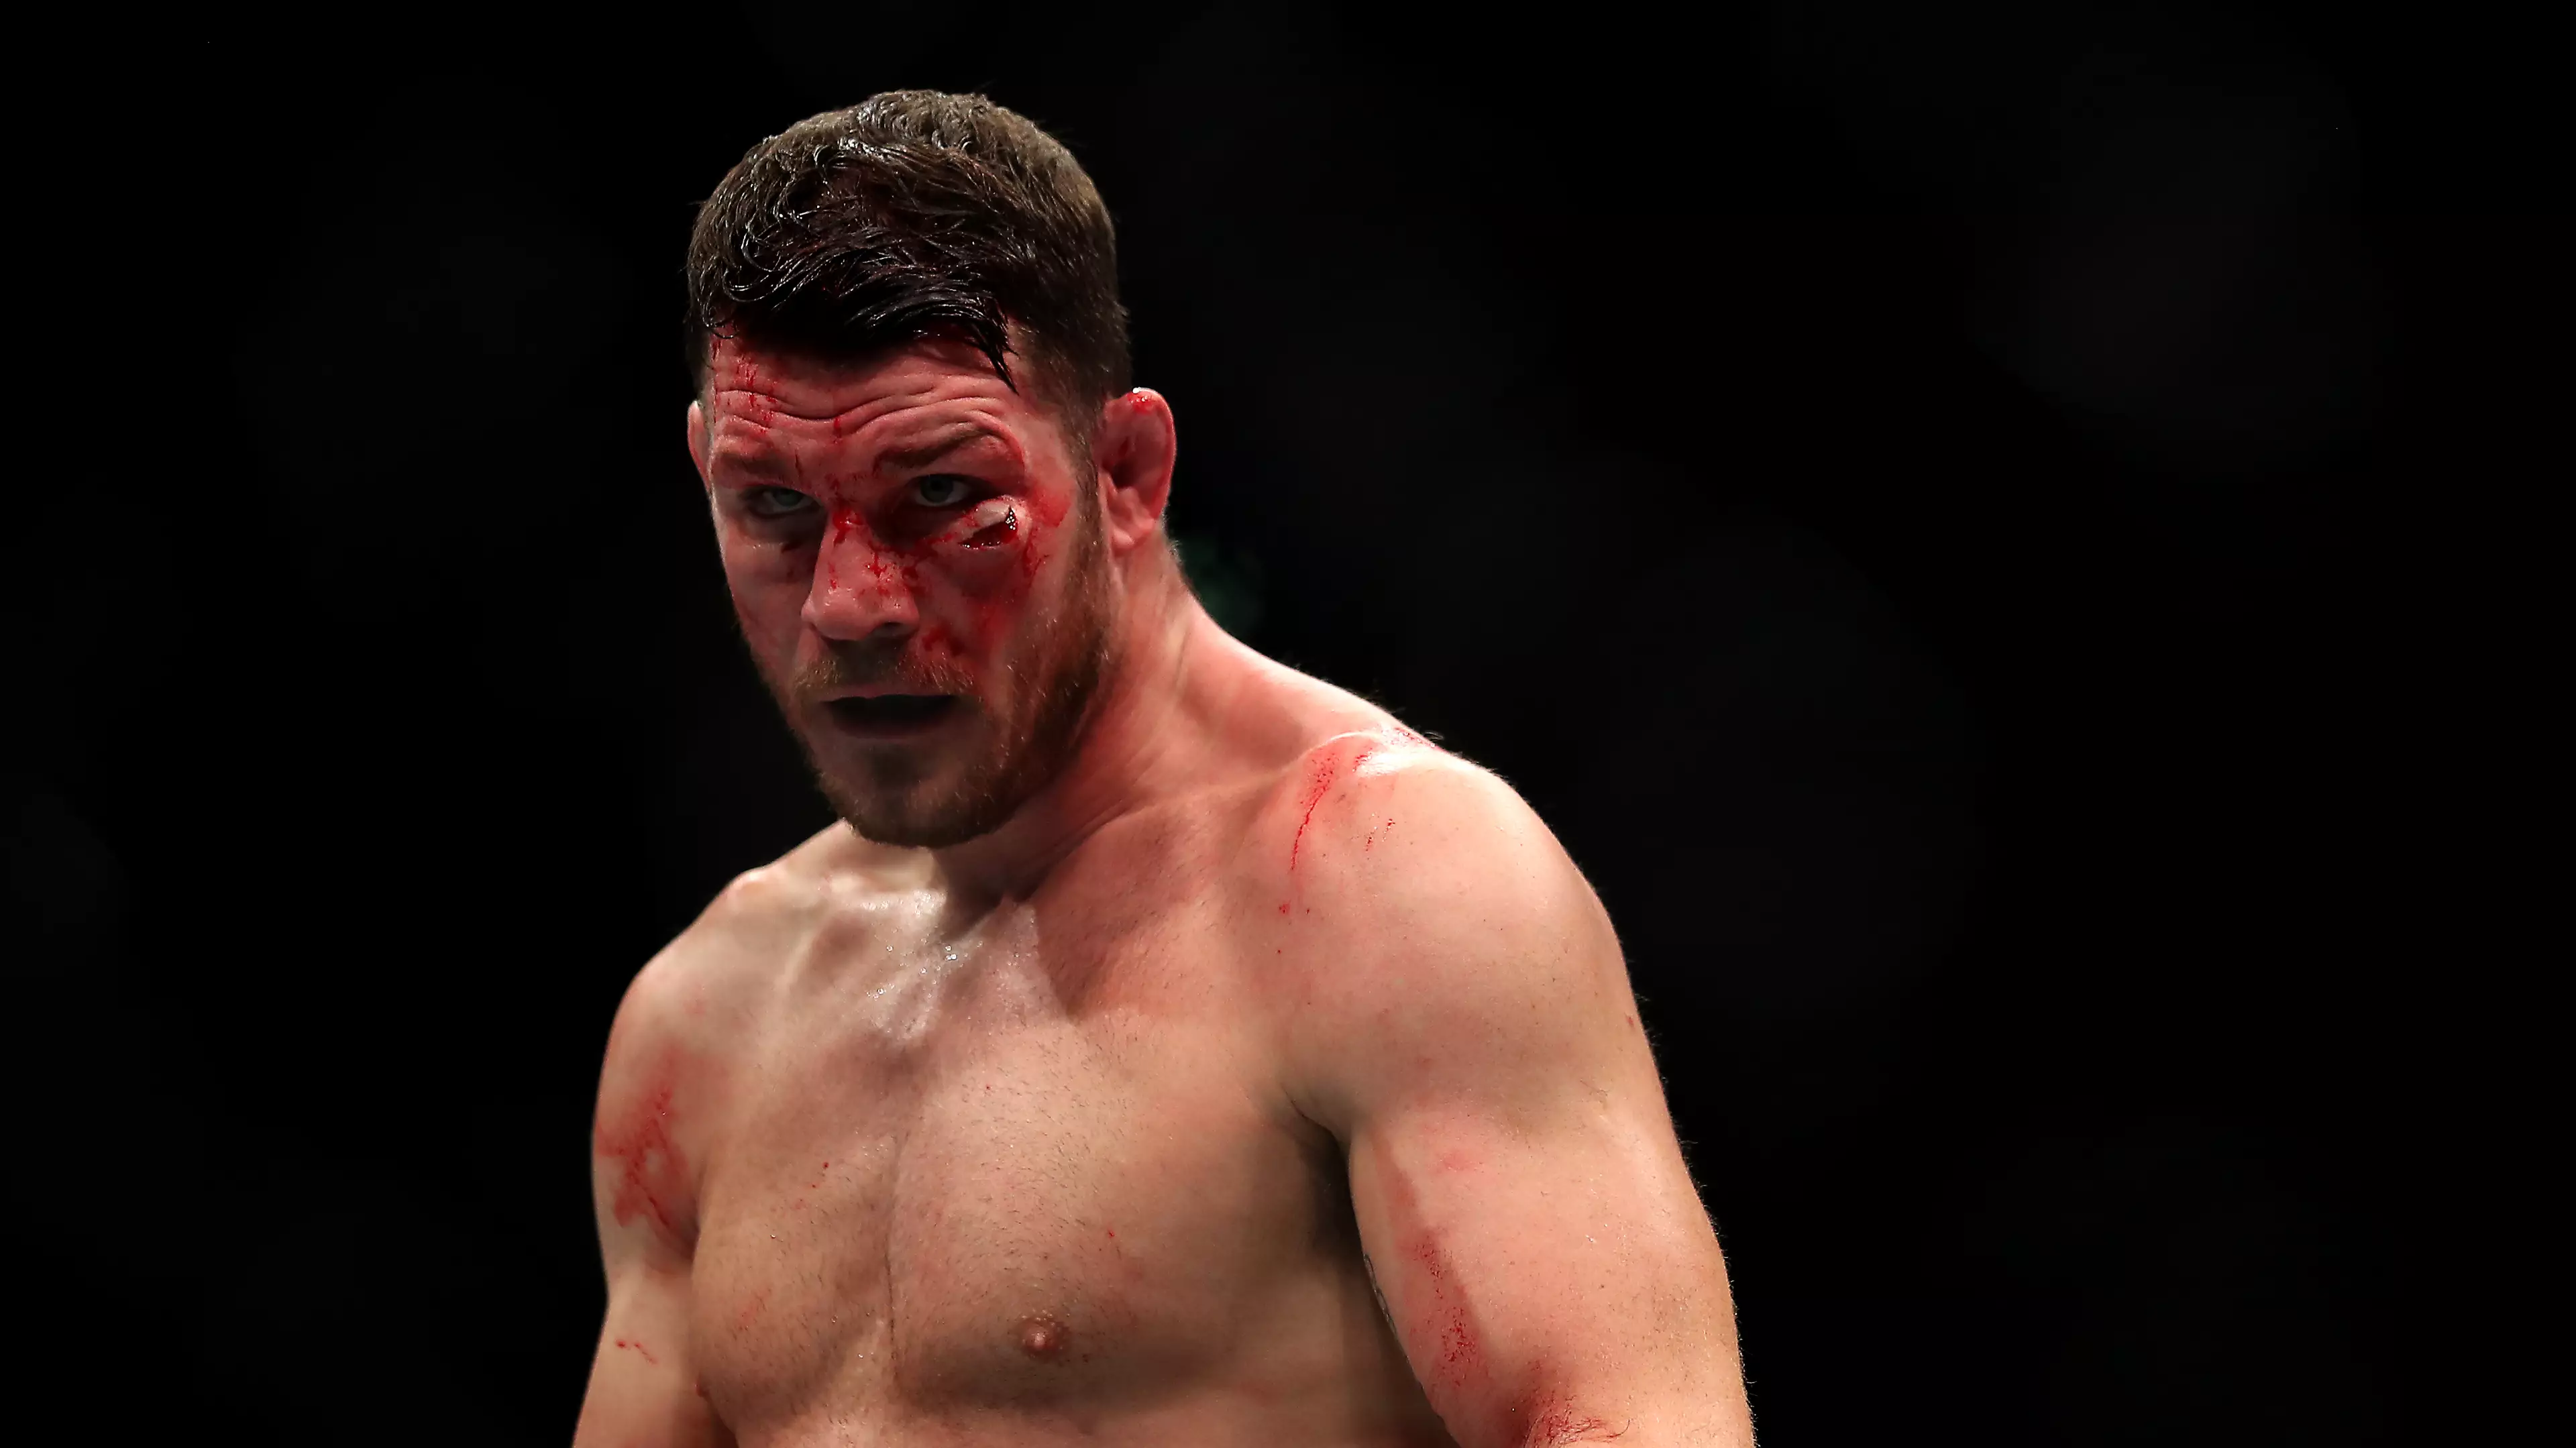 Michael Bisping 'Laughed And Walked Off' After Being Assaulted In The Street